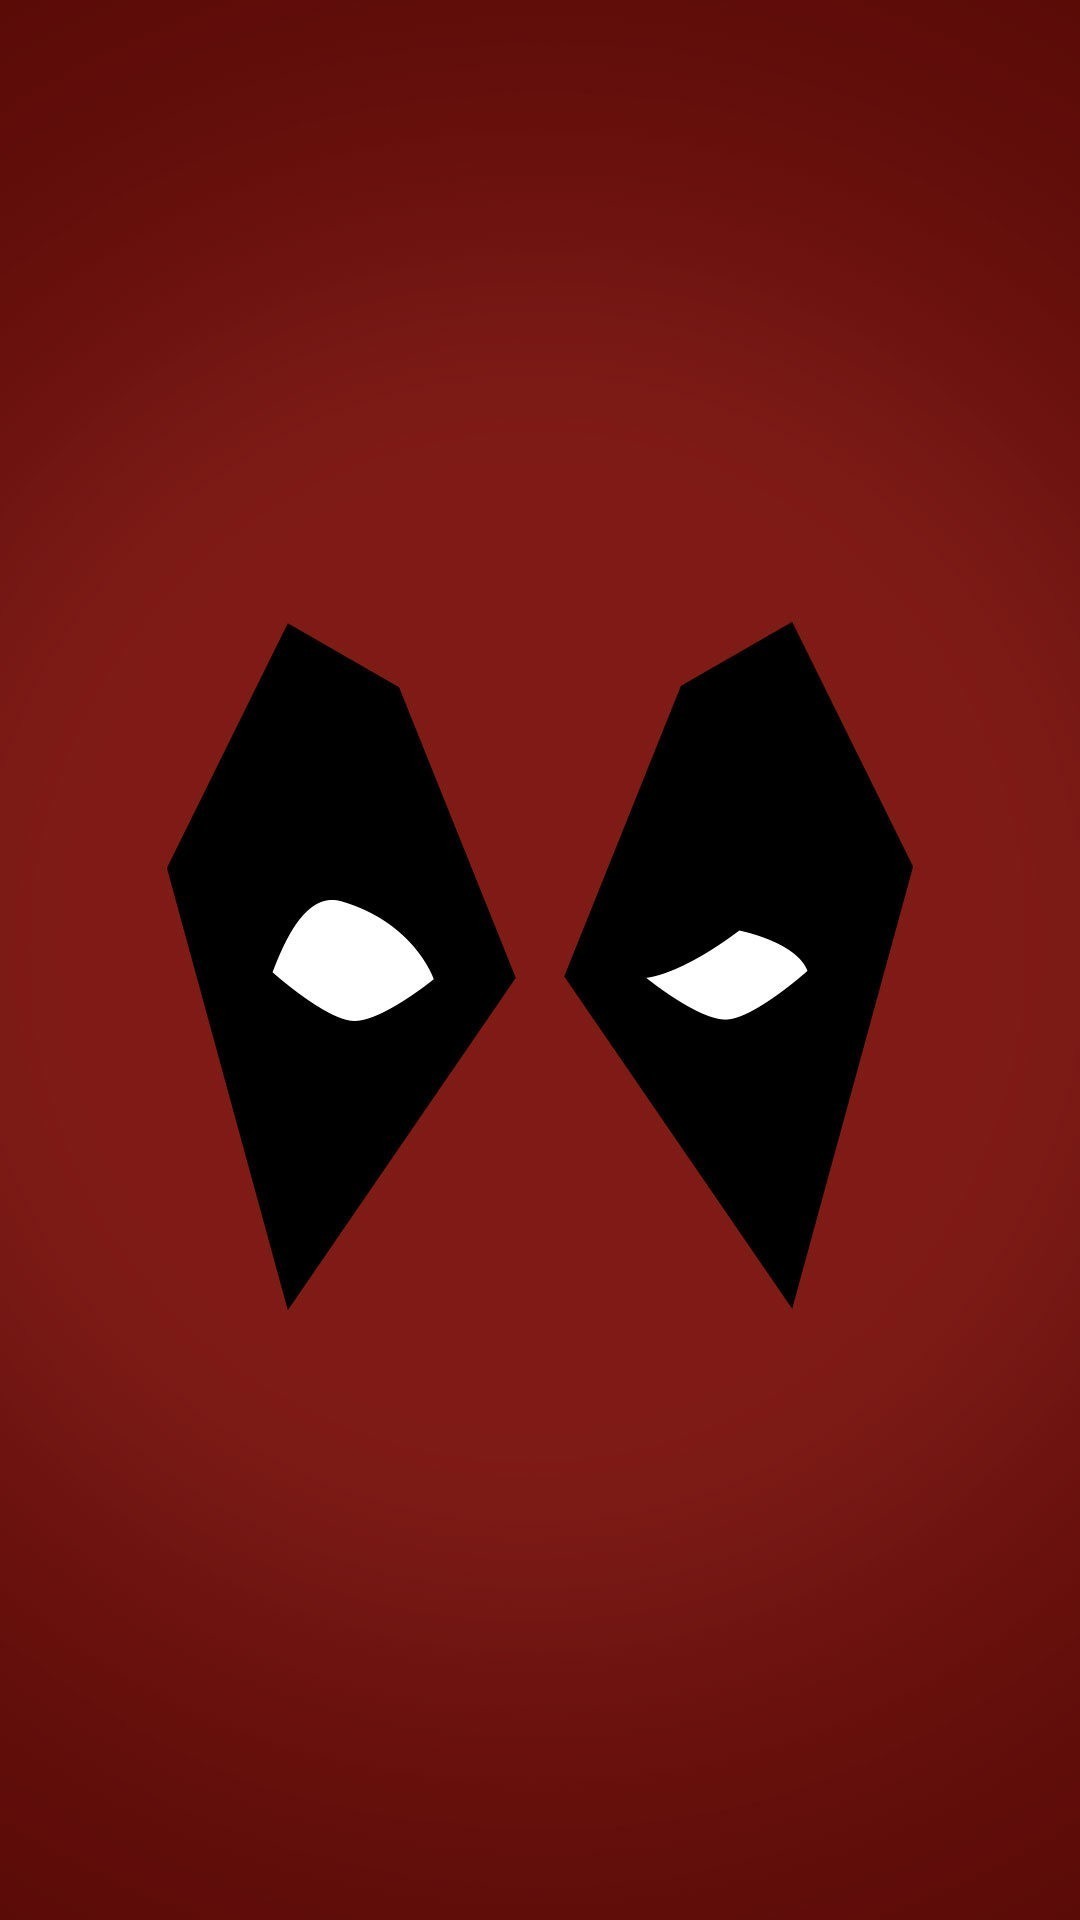  Deadpool  wallpaper  HD    Download free wallpapers  for 